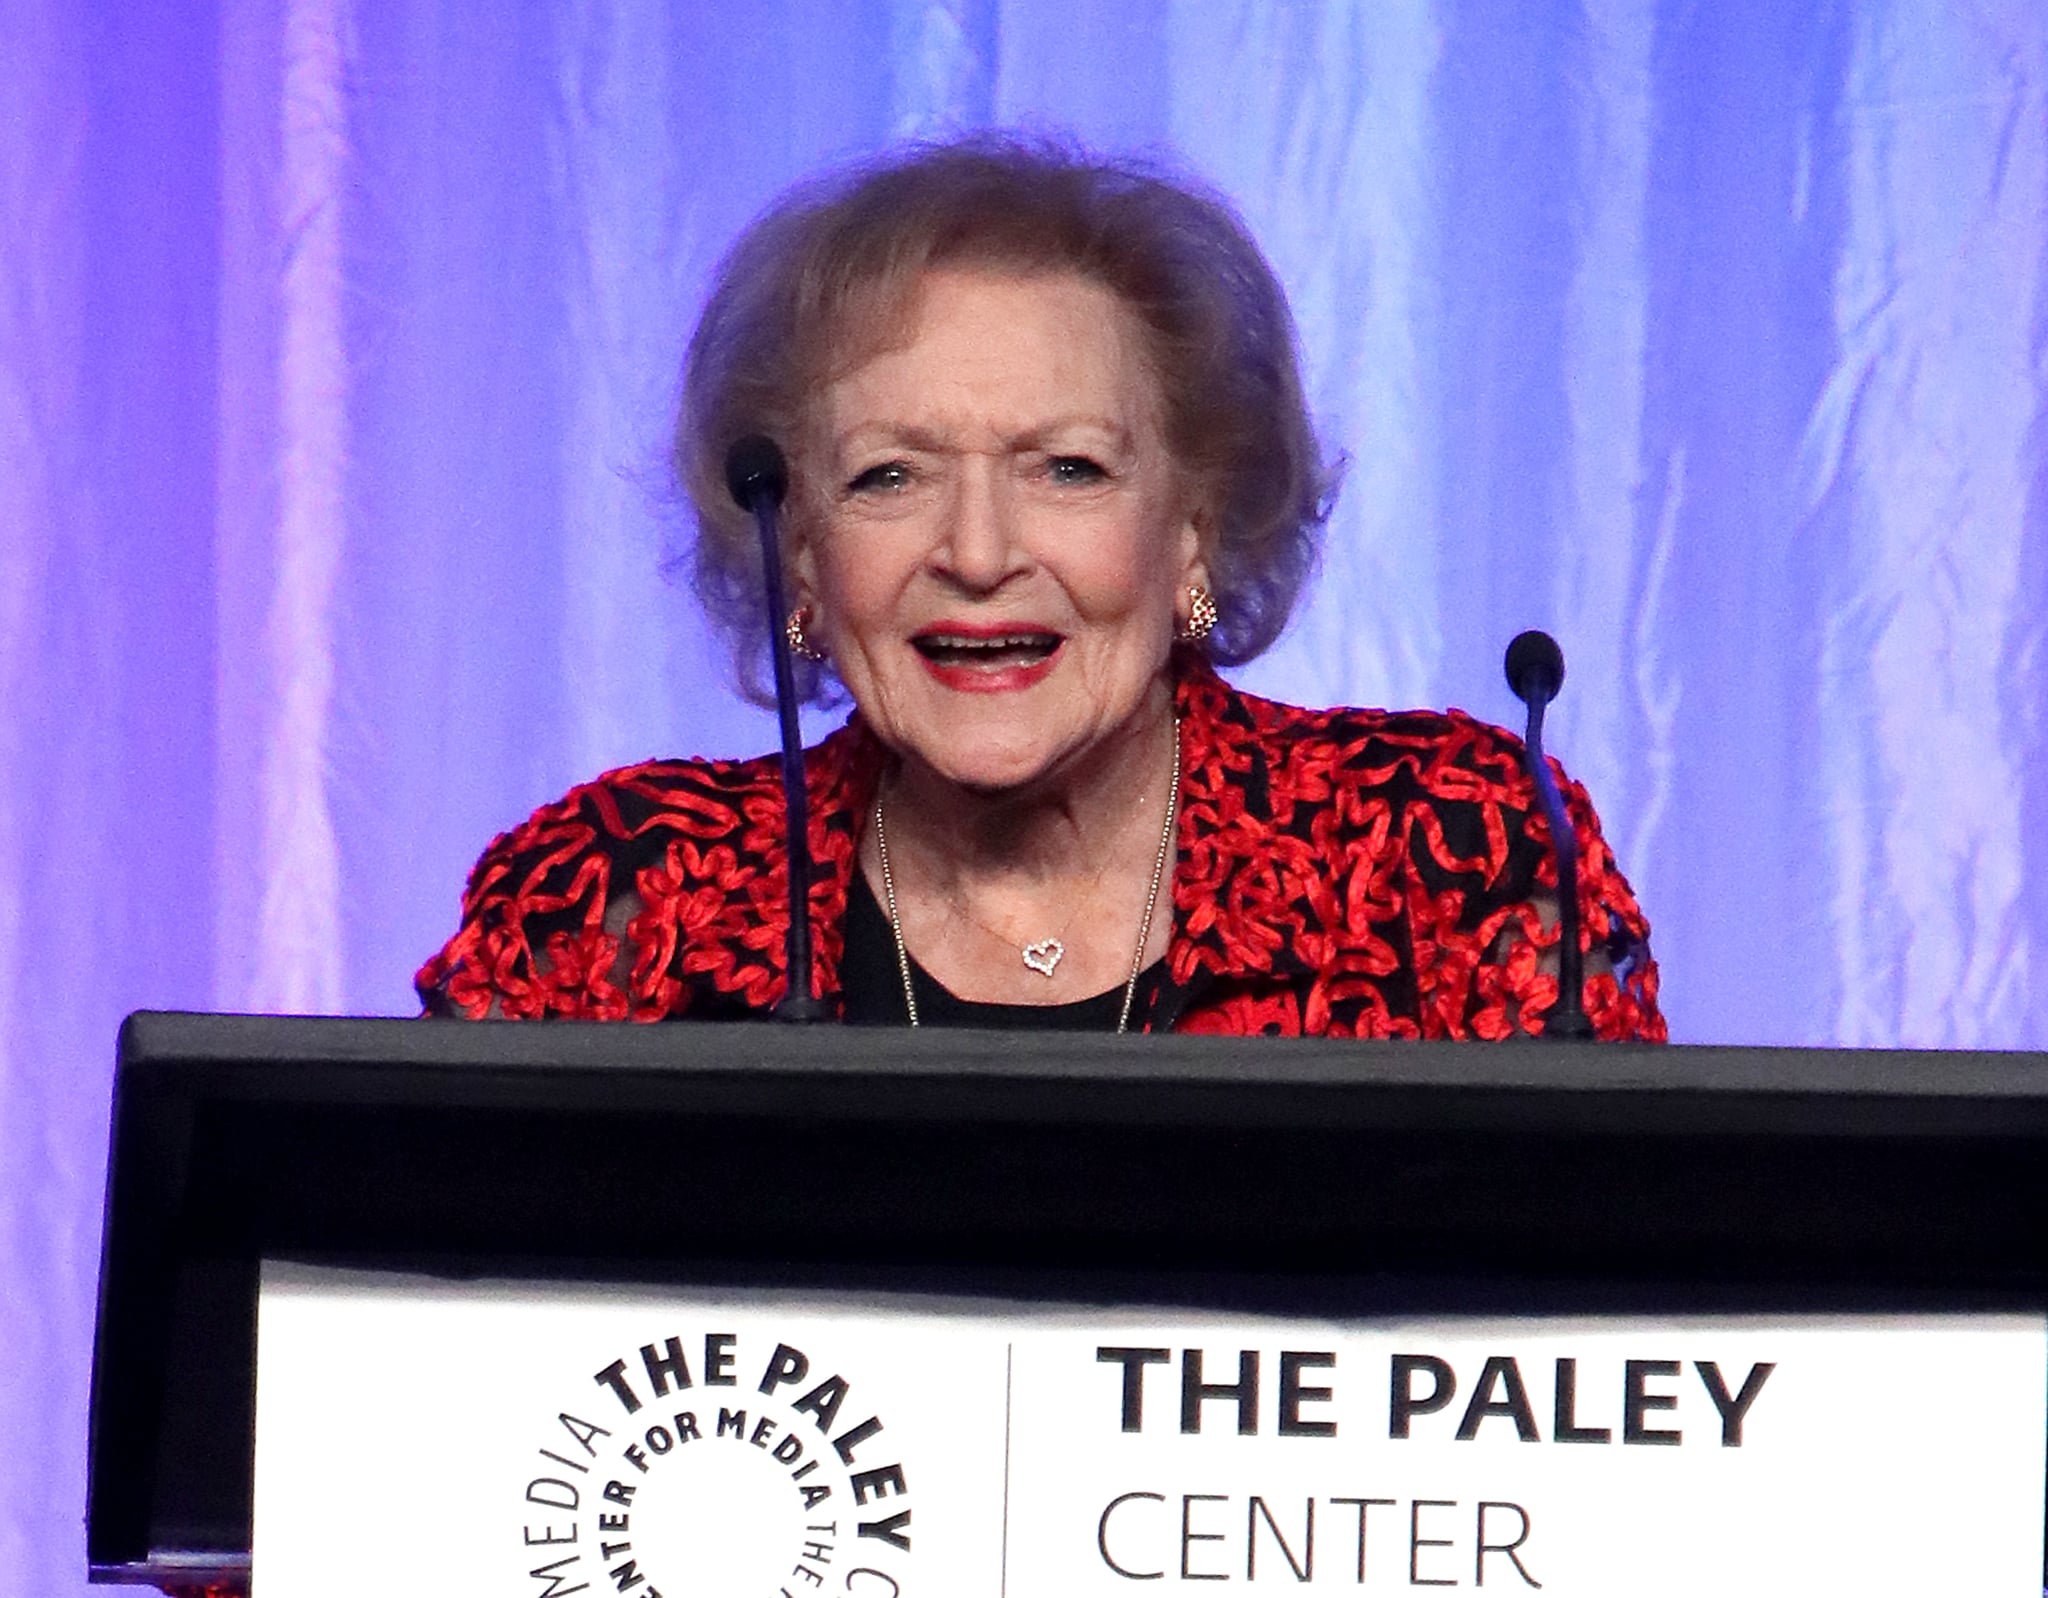 BEVERLY HILLS, CA - OCTOBER 12:  Actress Betty White speaks at Paley Honors in Hollywood: A Gala Celebrating Women in Television at the Beverly Wilshire Four Seasons Hotel on October 12, 2017 in Beverly Hills, California.  (Photo by David Livingston/Getty Images)